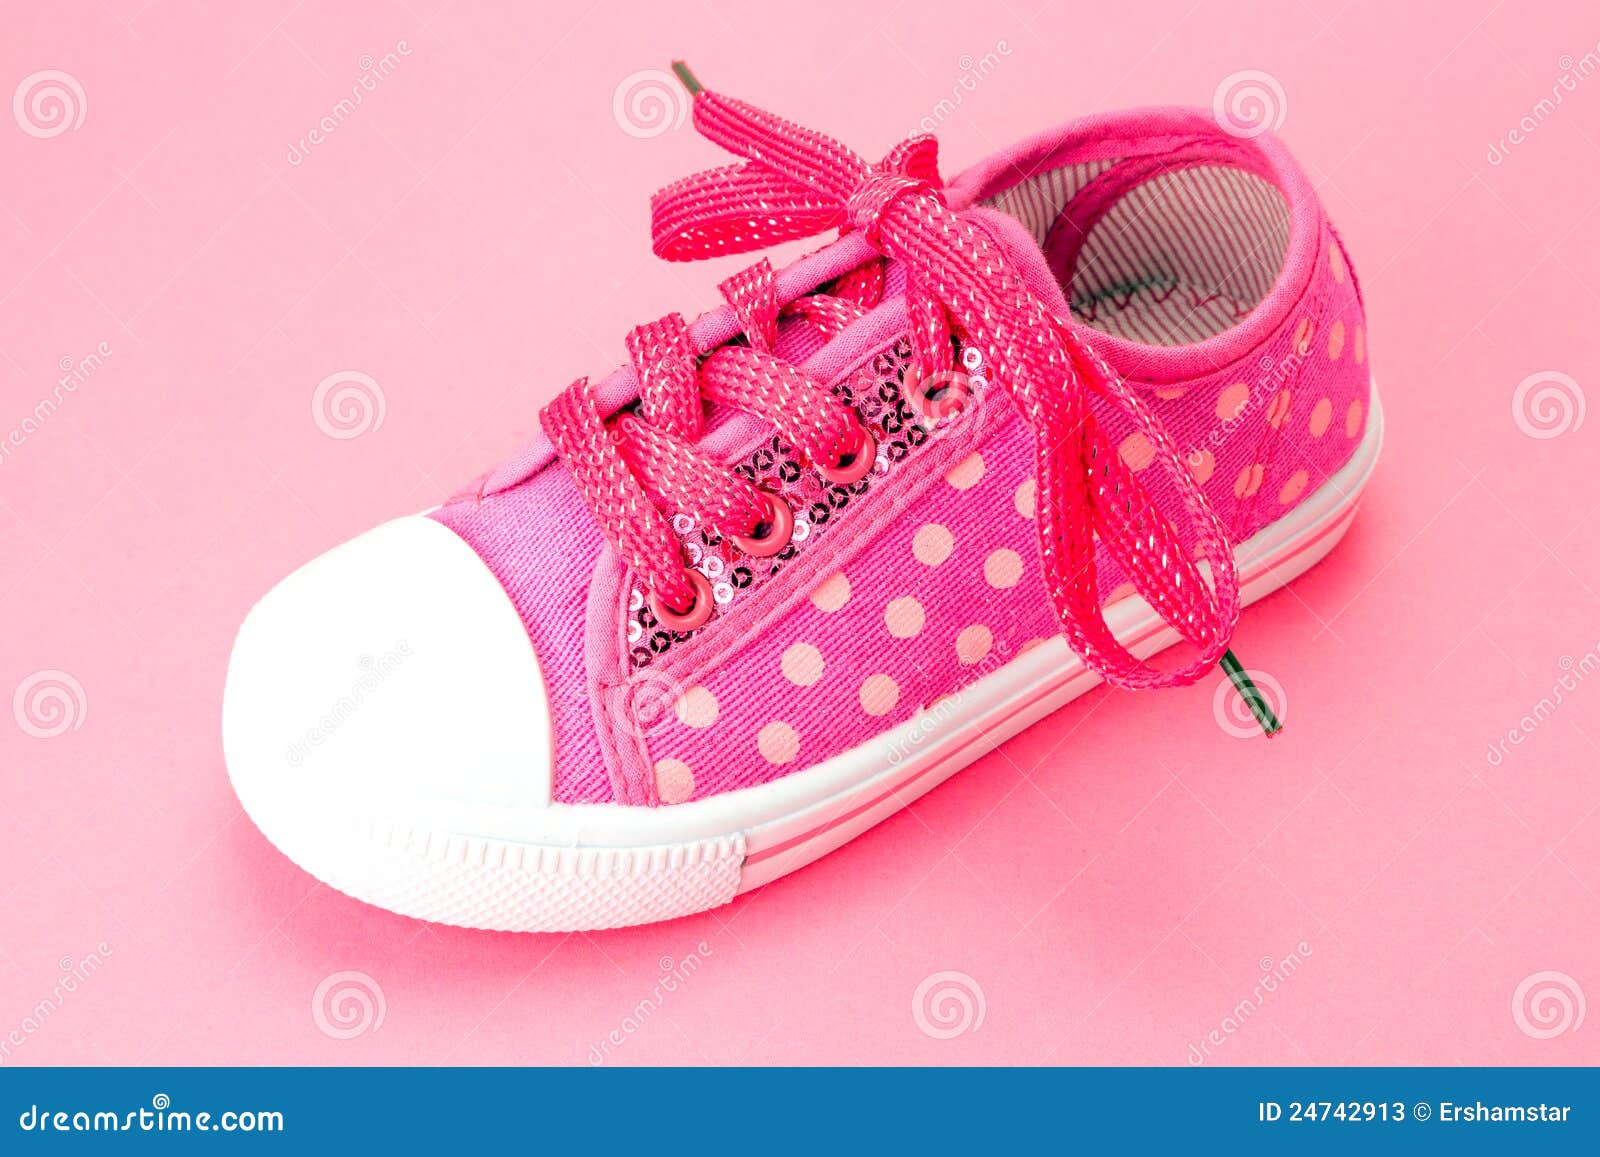 Toddlers pink baby shoes stock image. Image of child - 24742913